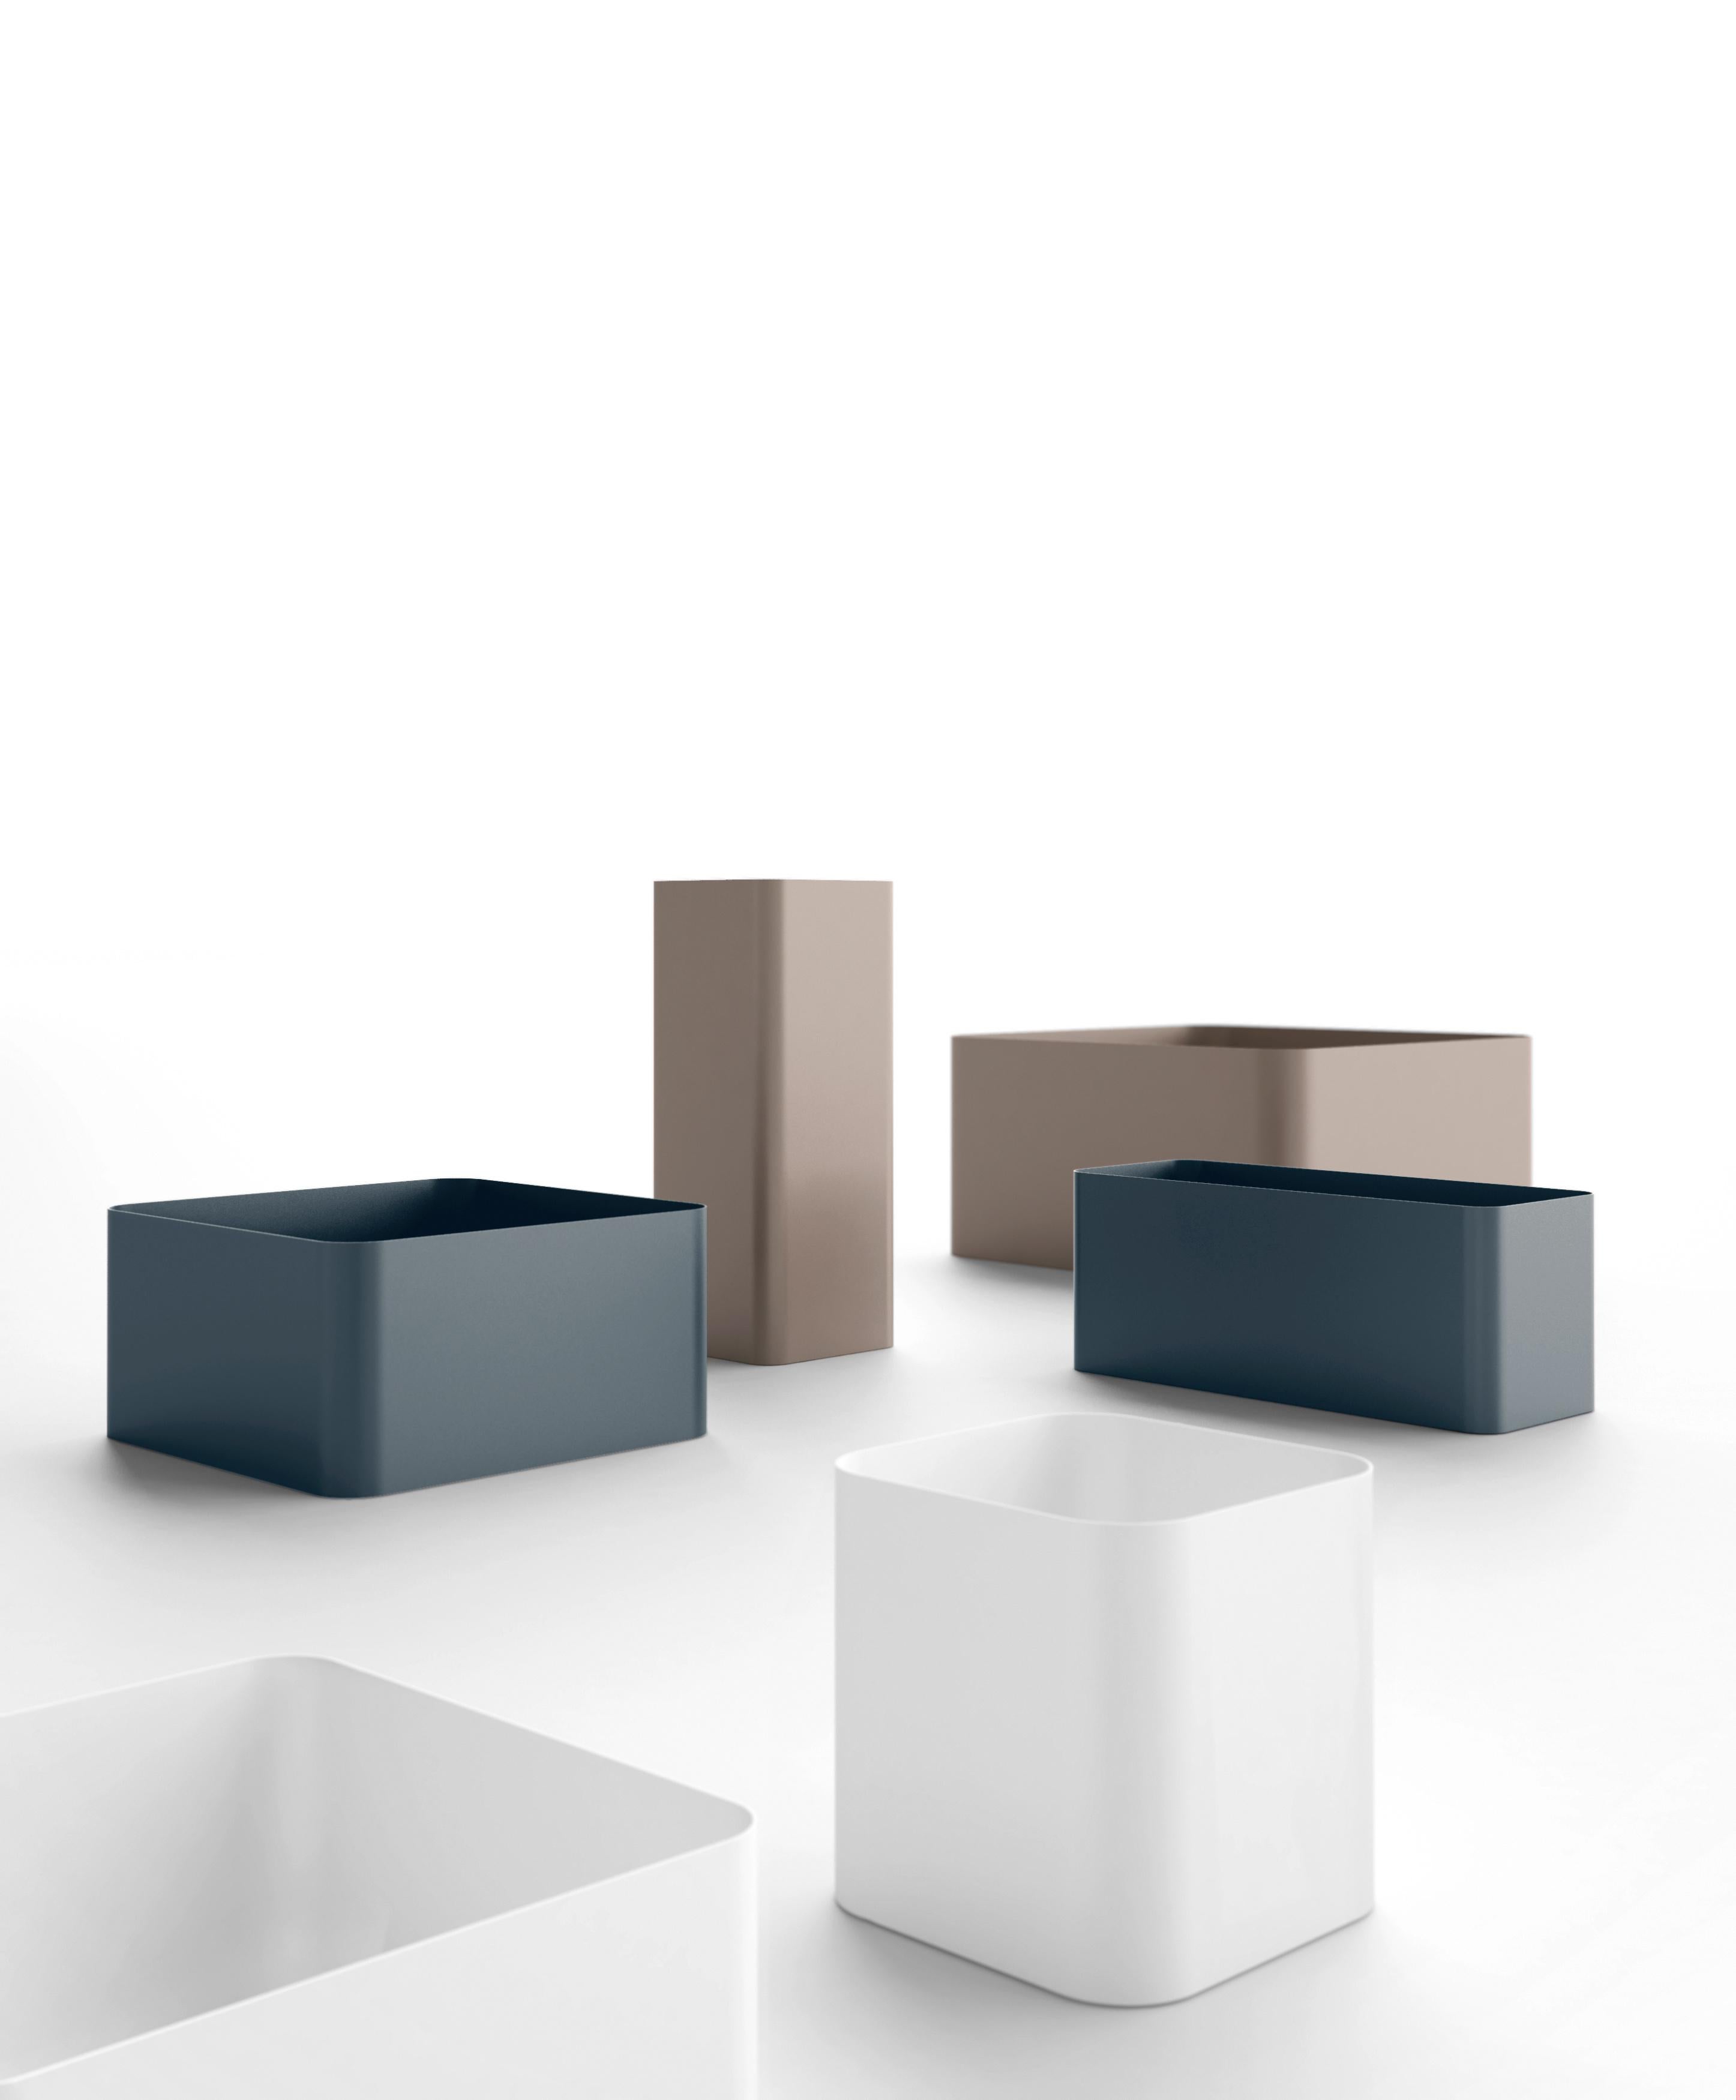 “Lining up several Sonora planters in a row allows areas to be divided as using a separator.” – Pablo Gironés (Designer) – SONORA is a collection of designer planters inspired by the outlined sand dunes of the natural SONORA landscape. Their sober